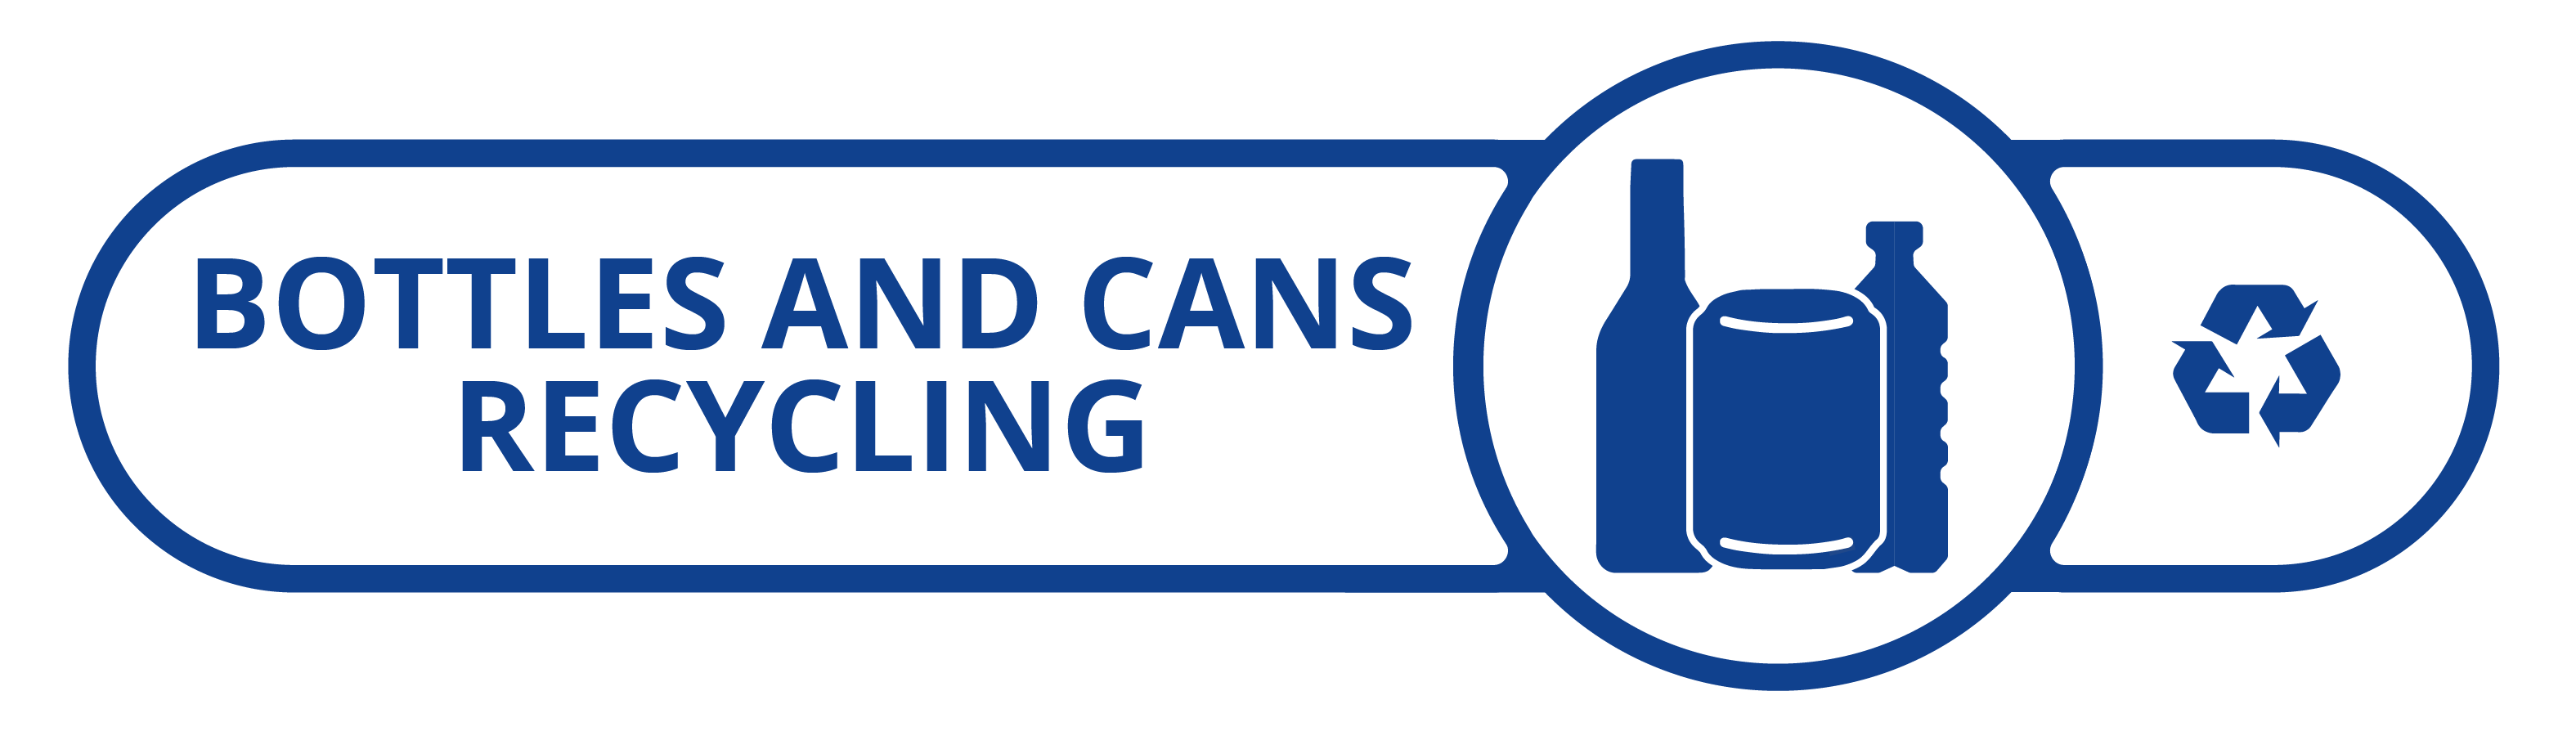 waste-icon-bottles-cans-with-words.png